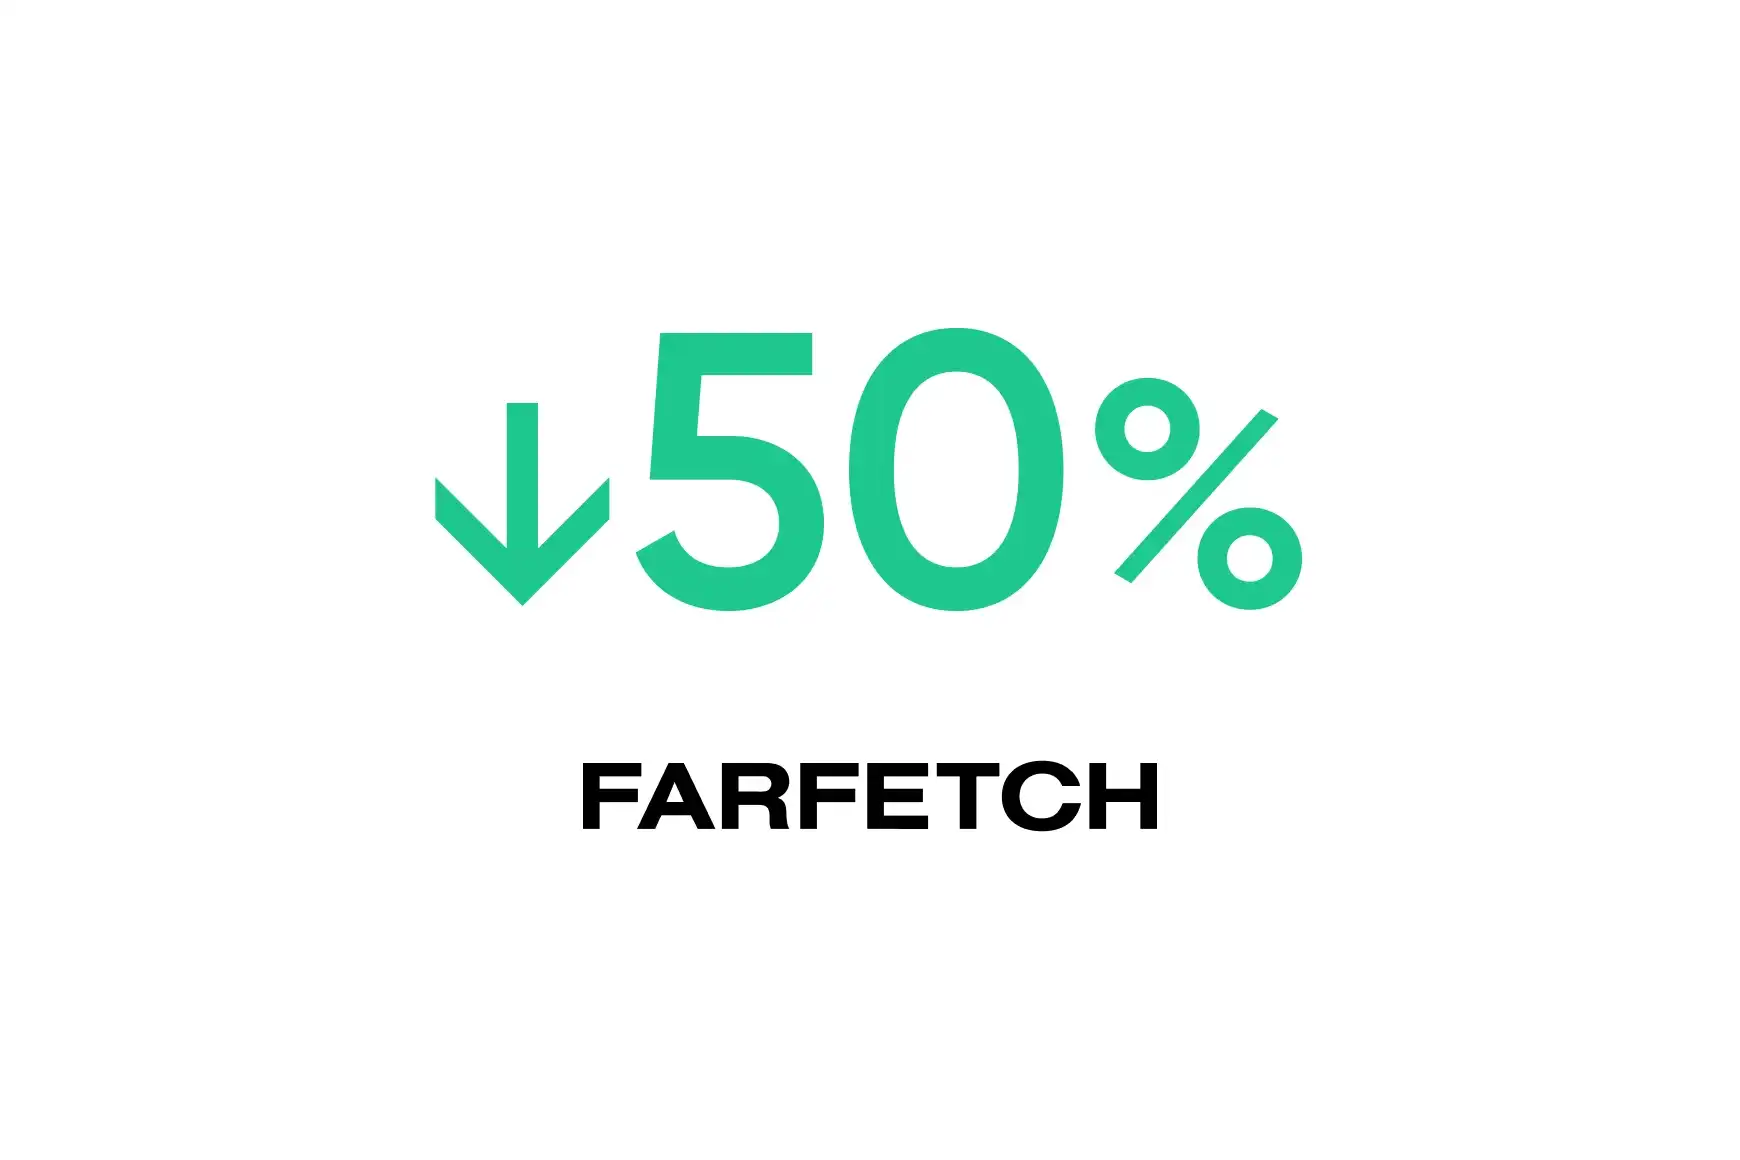 Farfetch: Automation improves handle times by 50%